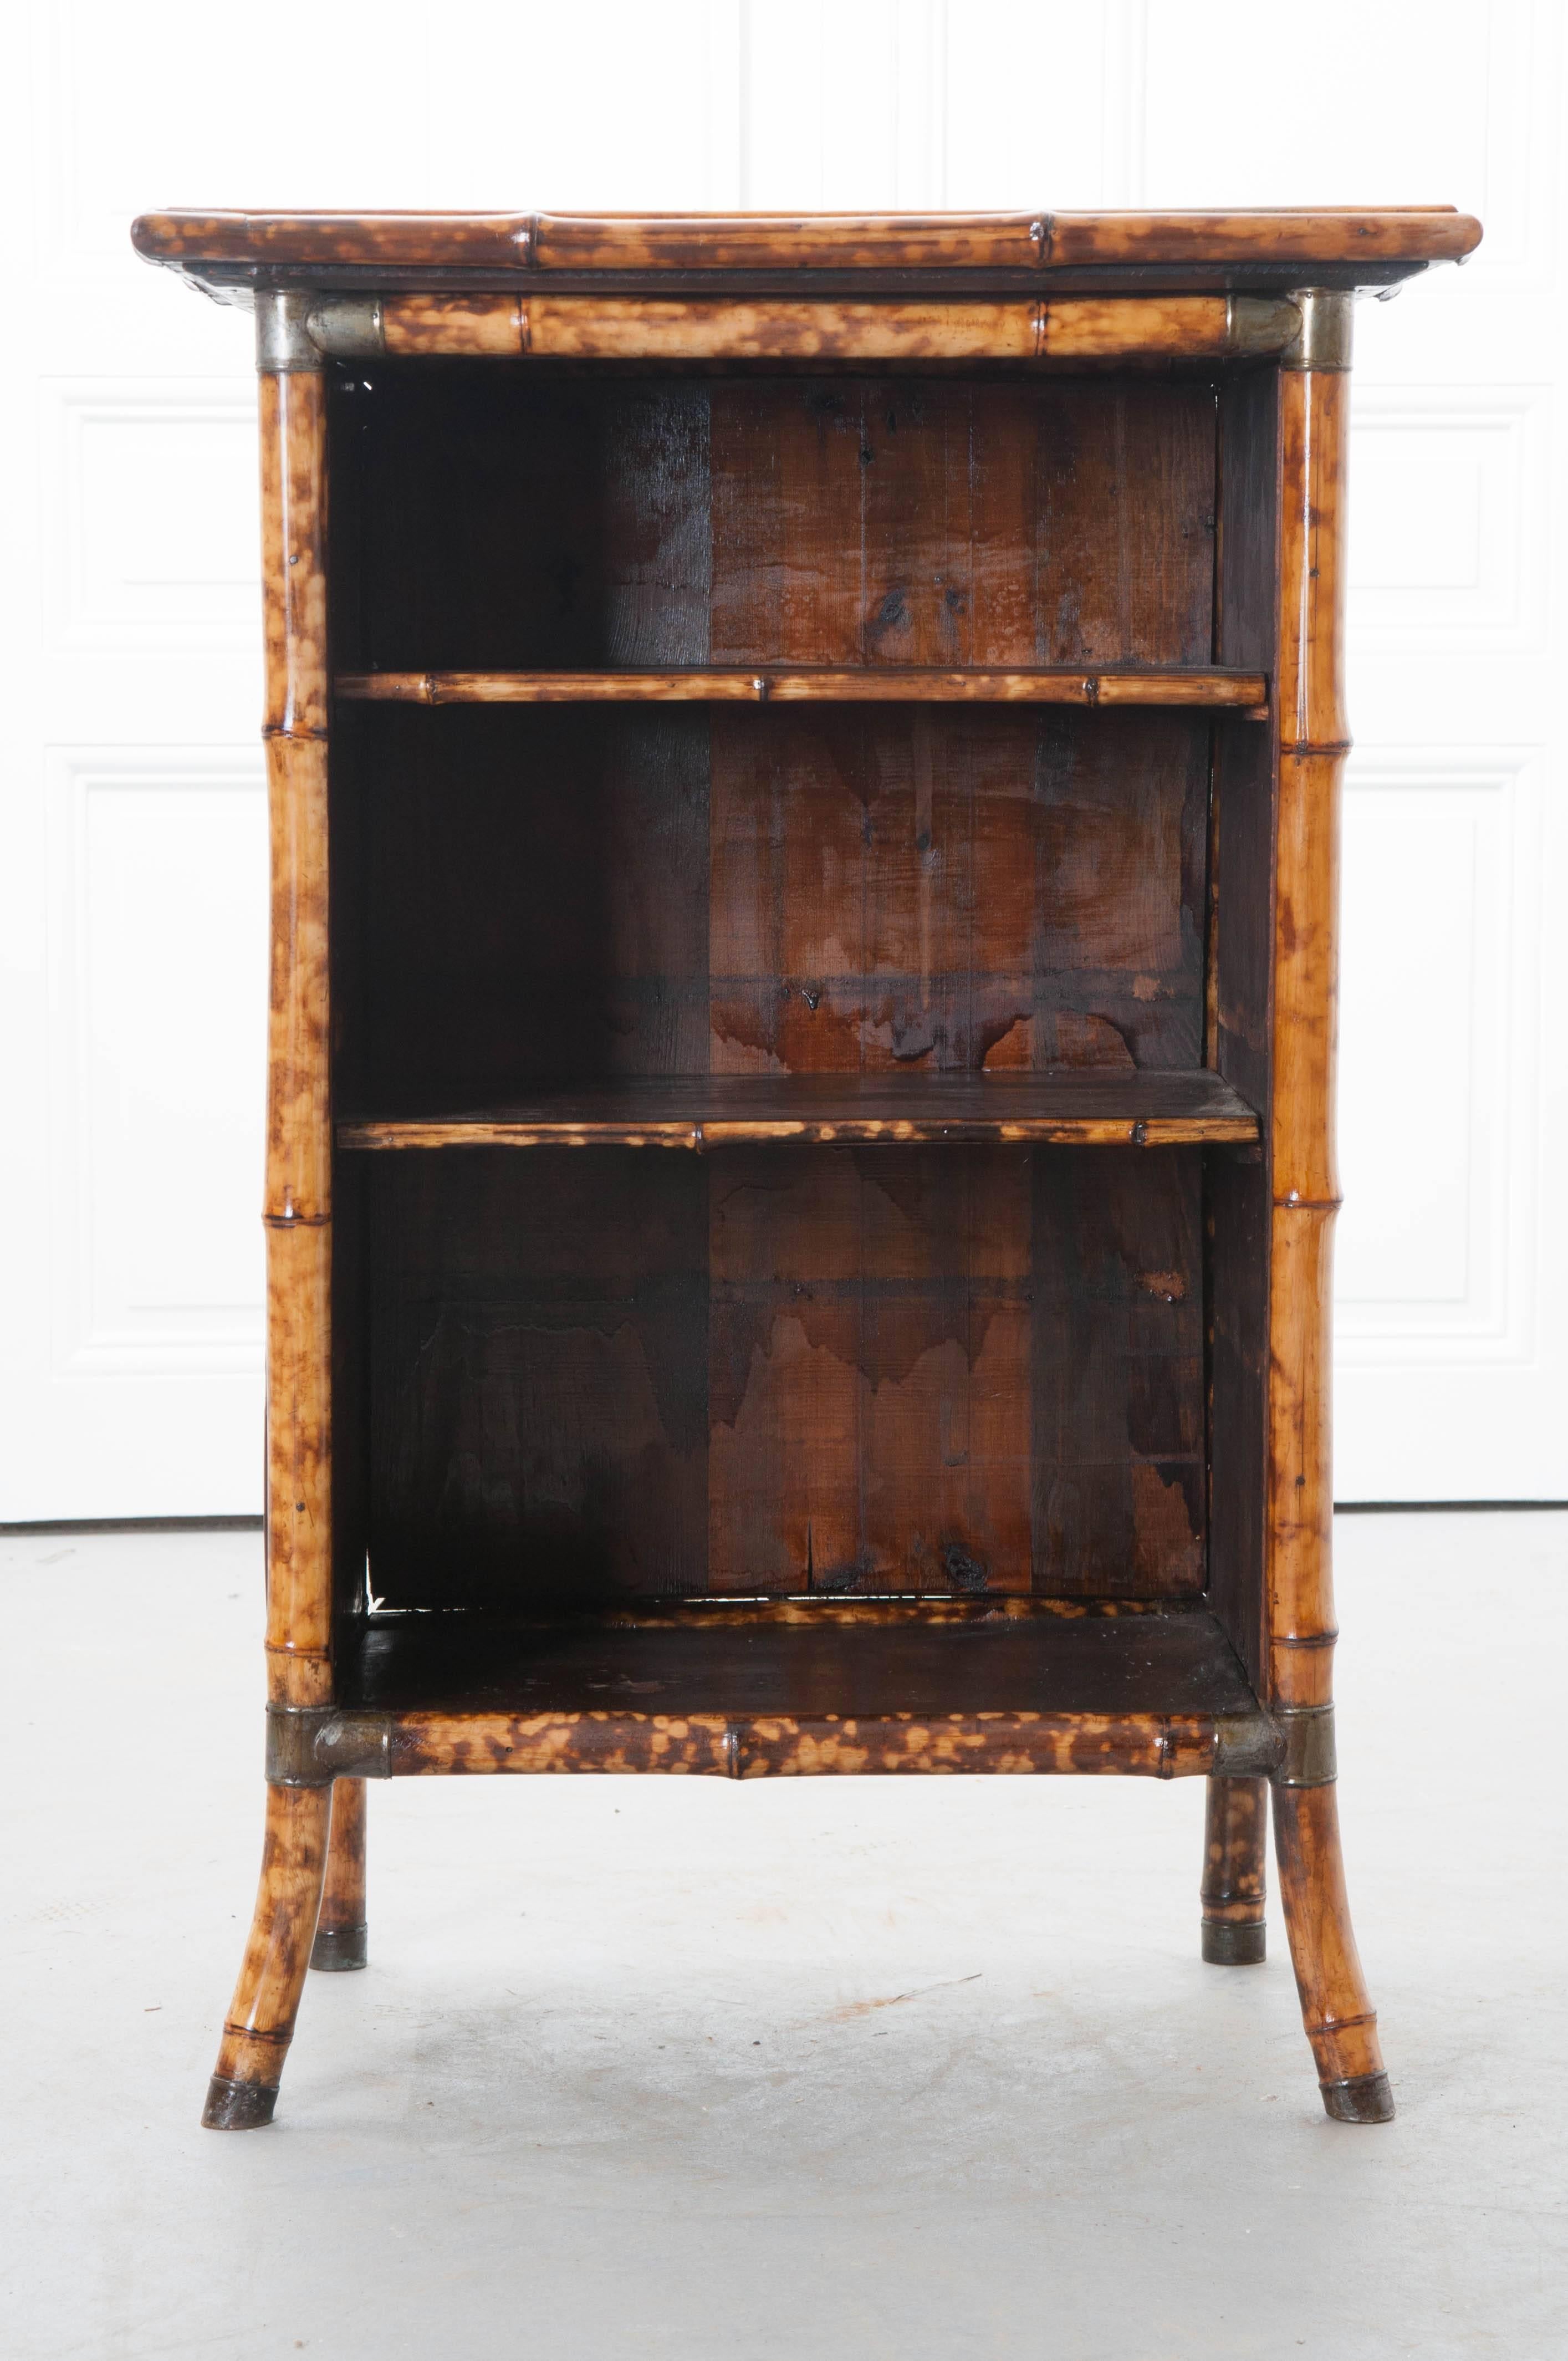 A fabulous Victorian bamboo bookcase from 19th century England, that has been more recently decoupaged with an assortment of beautiful gold colored shells on its top and sides. This bookcase has metal reinforced corners for added stability and